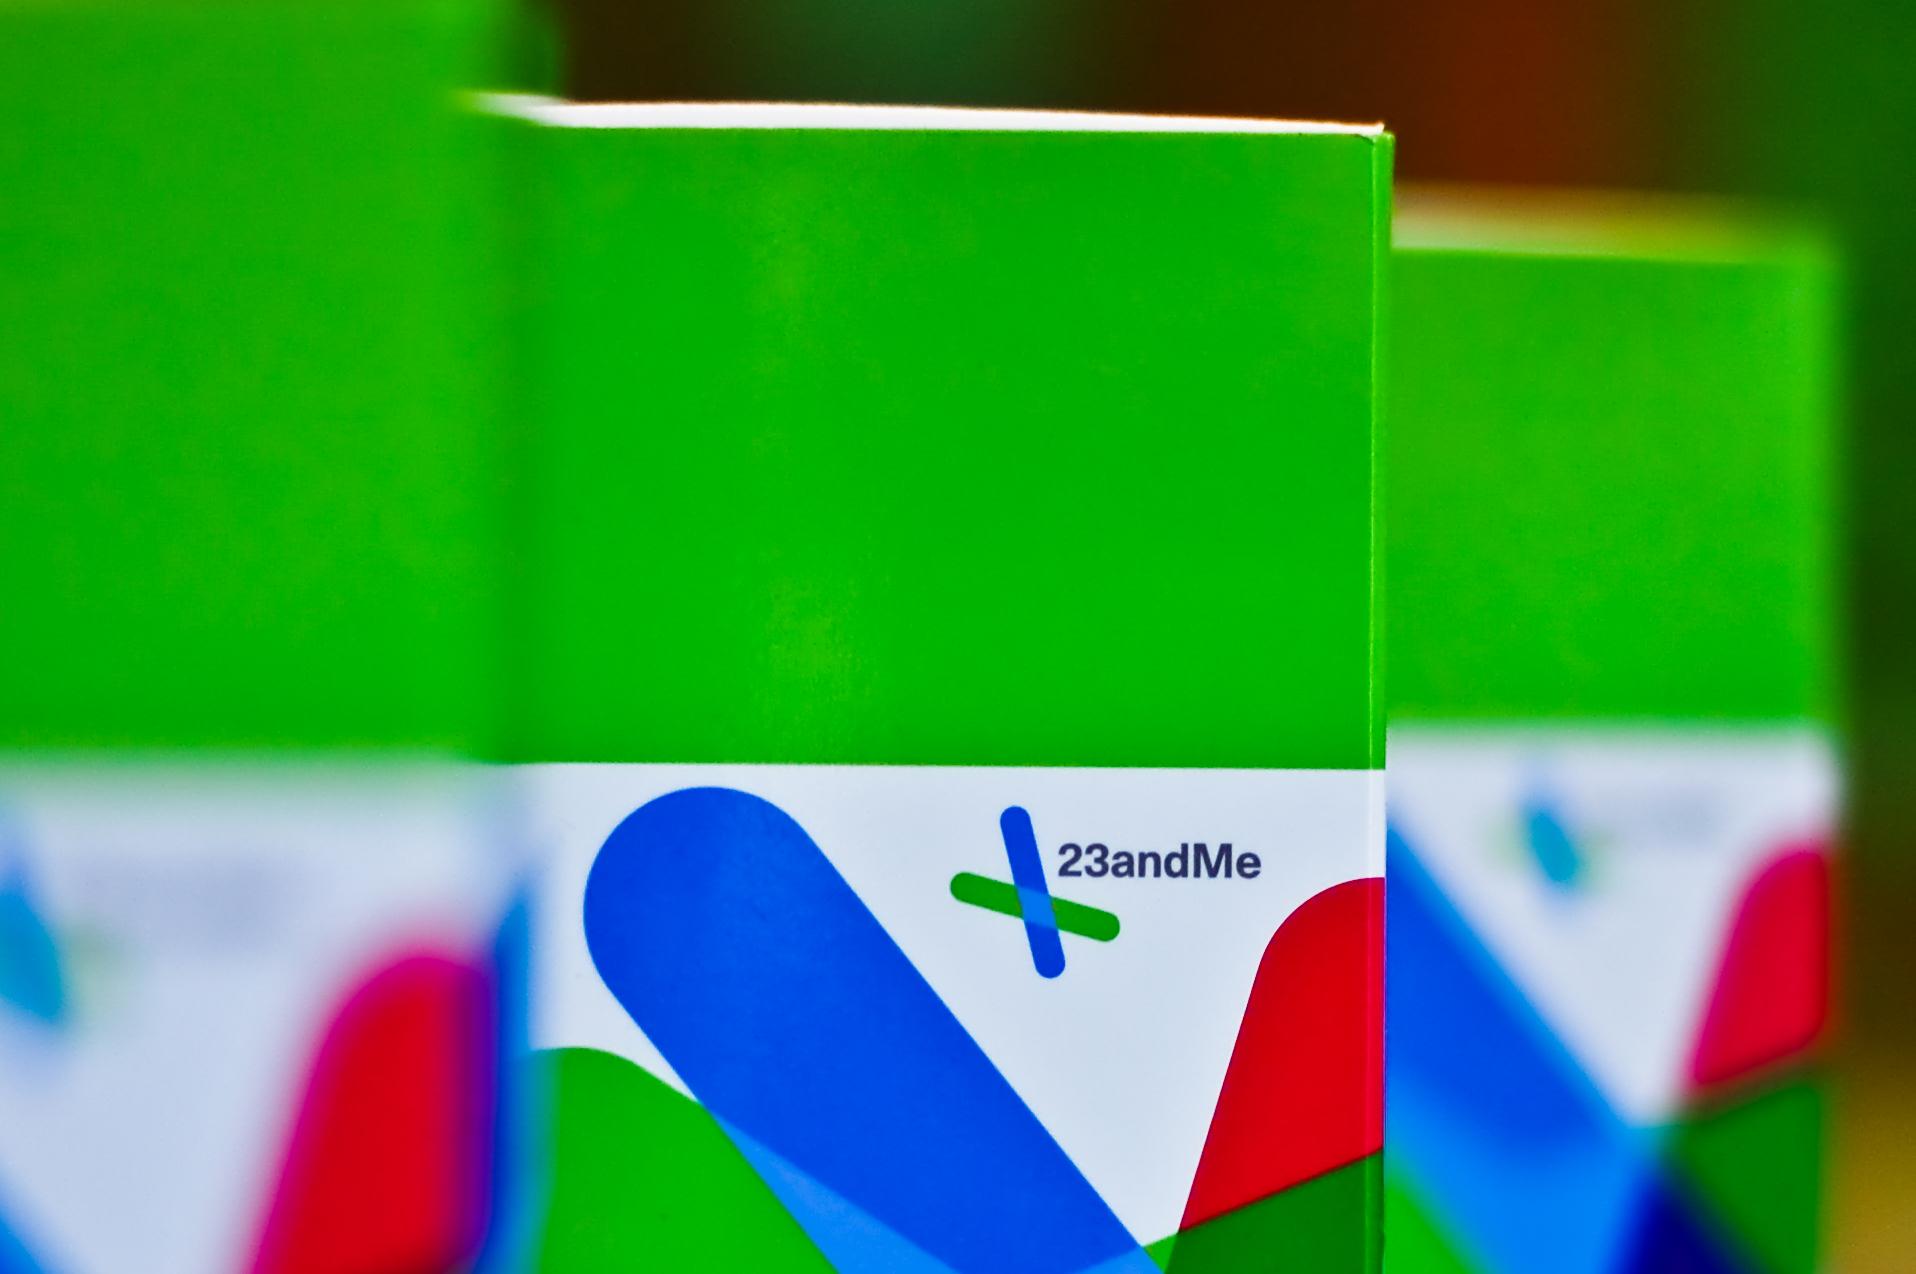 Three boxes of 23andMe spit kits are positioned side by side. The middle box is the only box that appears in full focus. The others are slightly blurred.